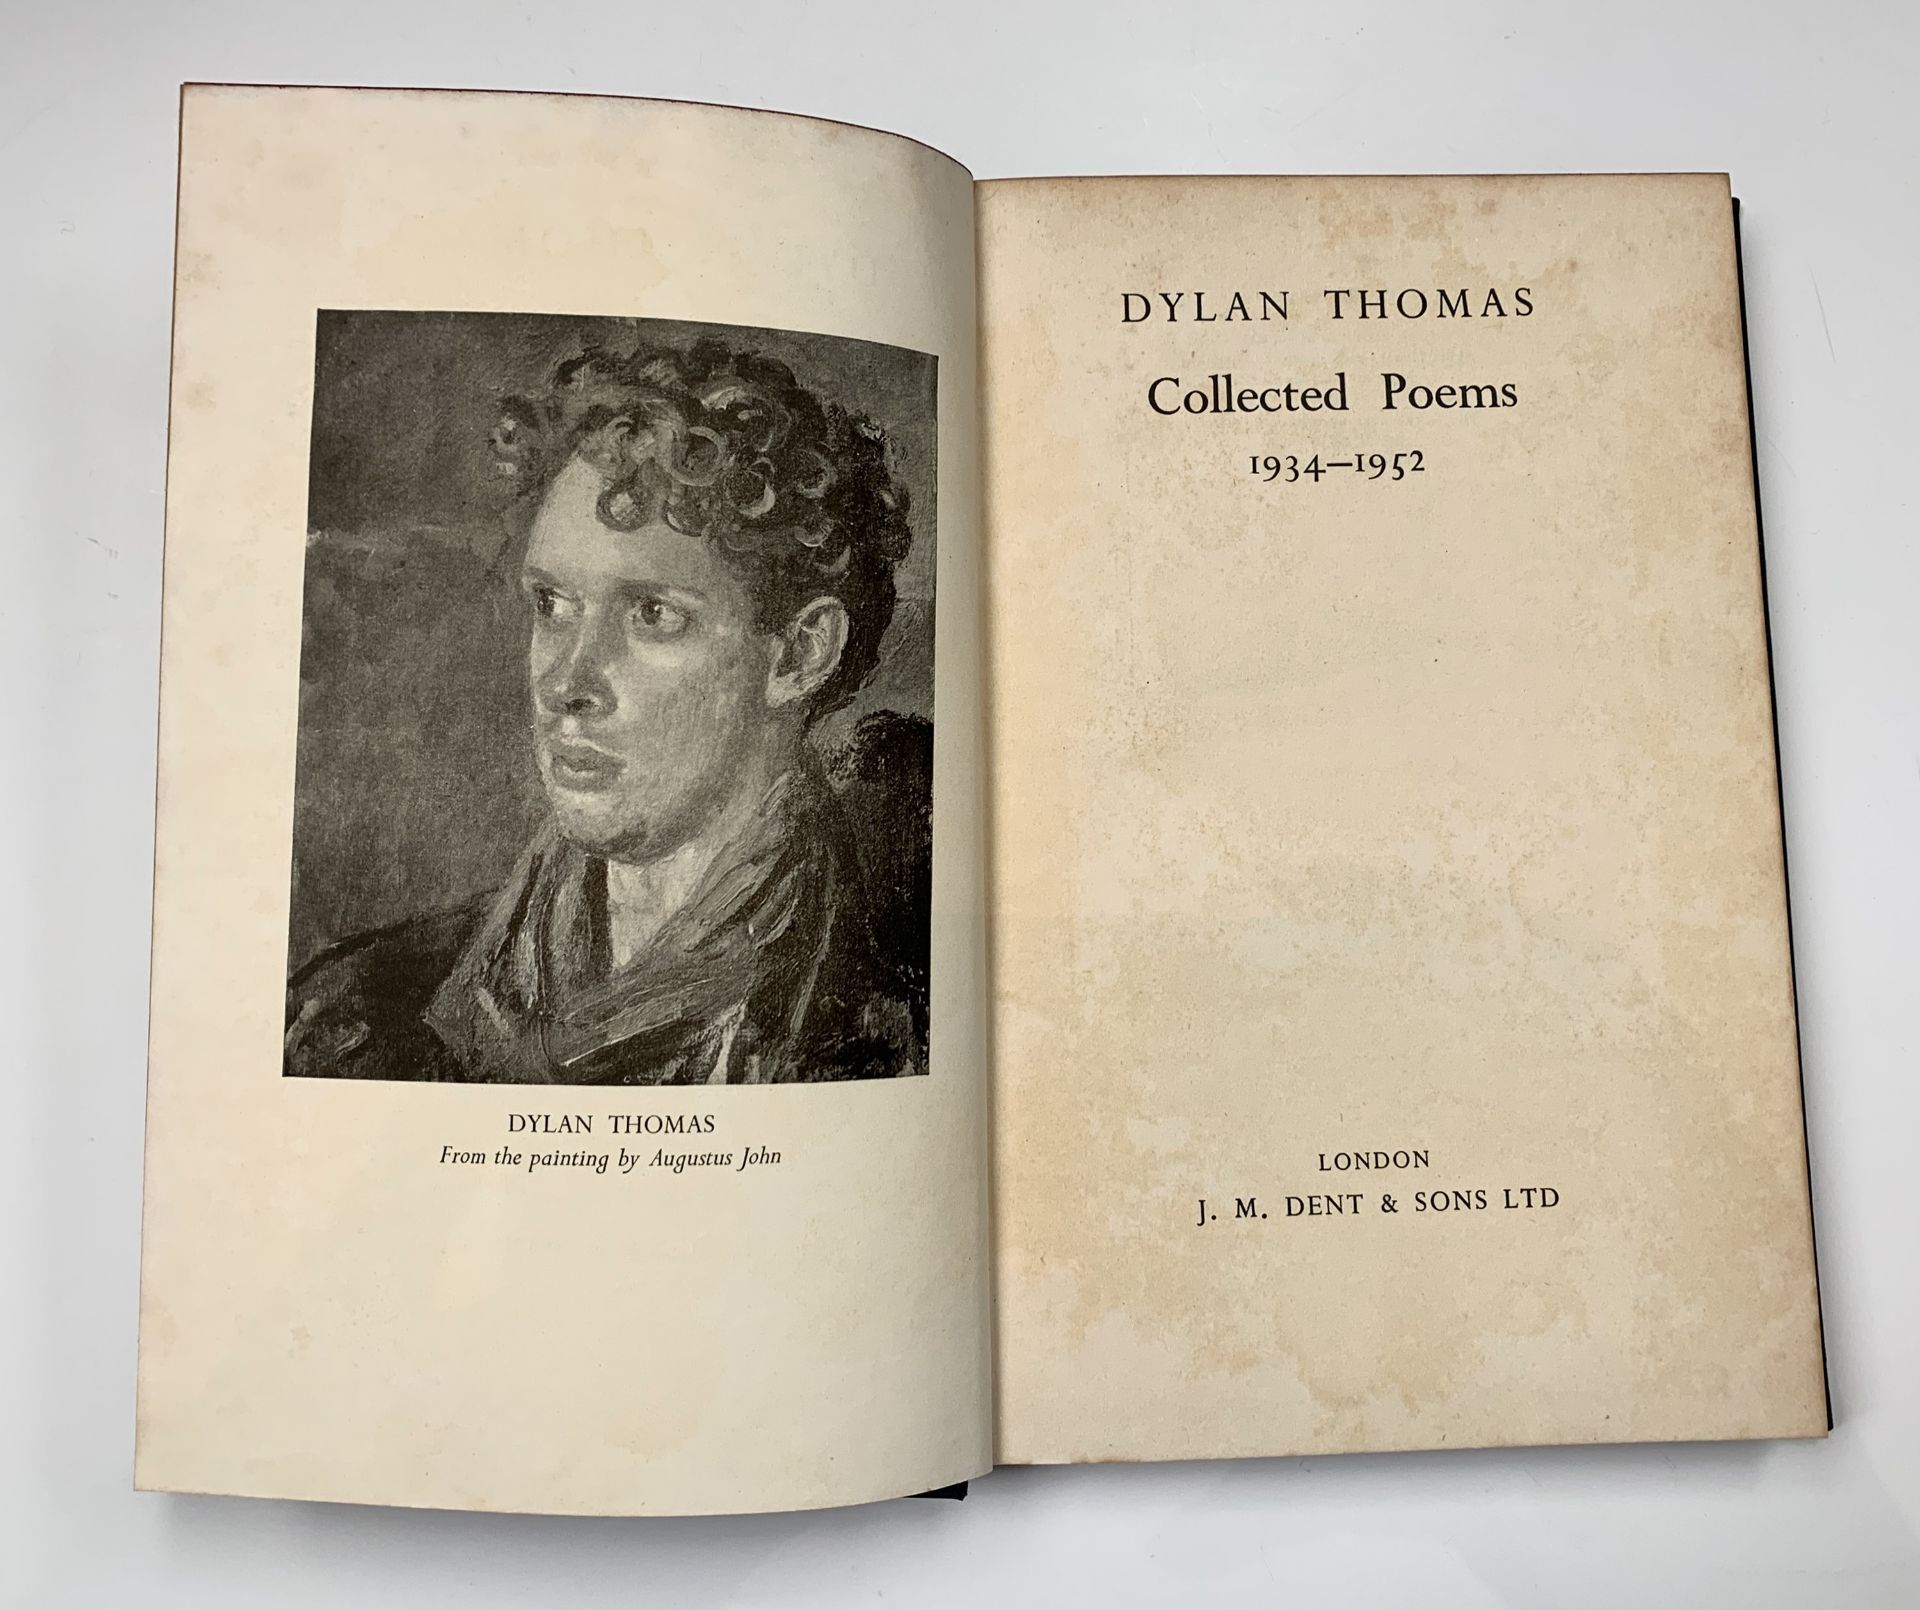 DYLAN THOMAS. 'Under Milk Wood.' First edition, vg condition with slightly worn dj, 1954; 'Collected